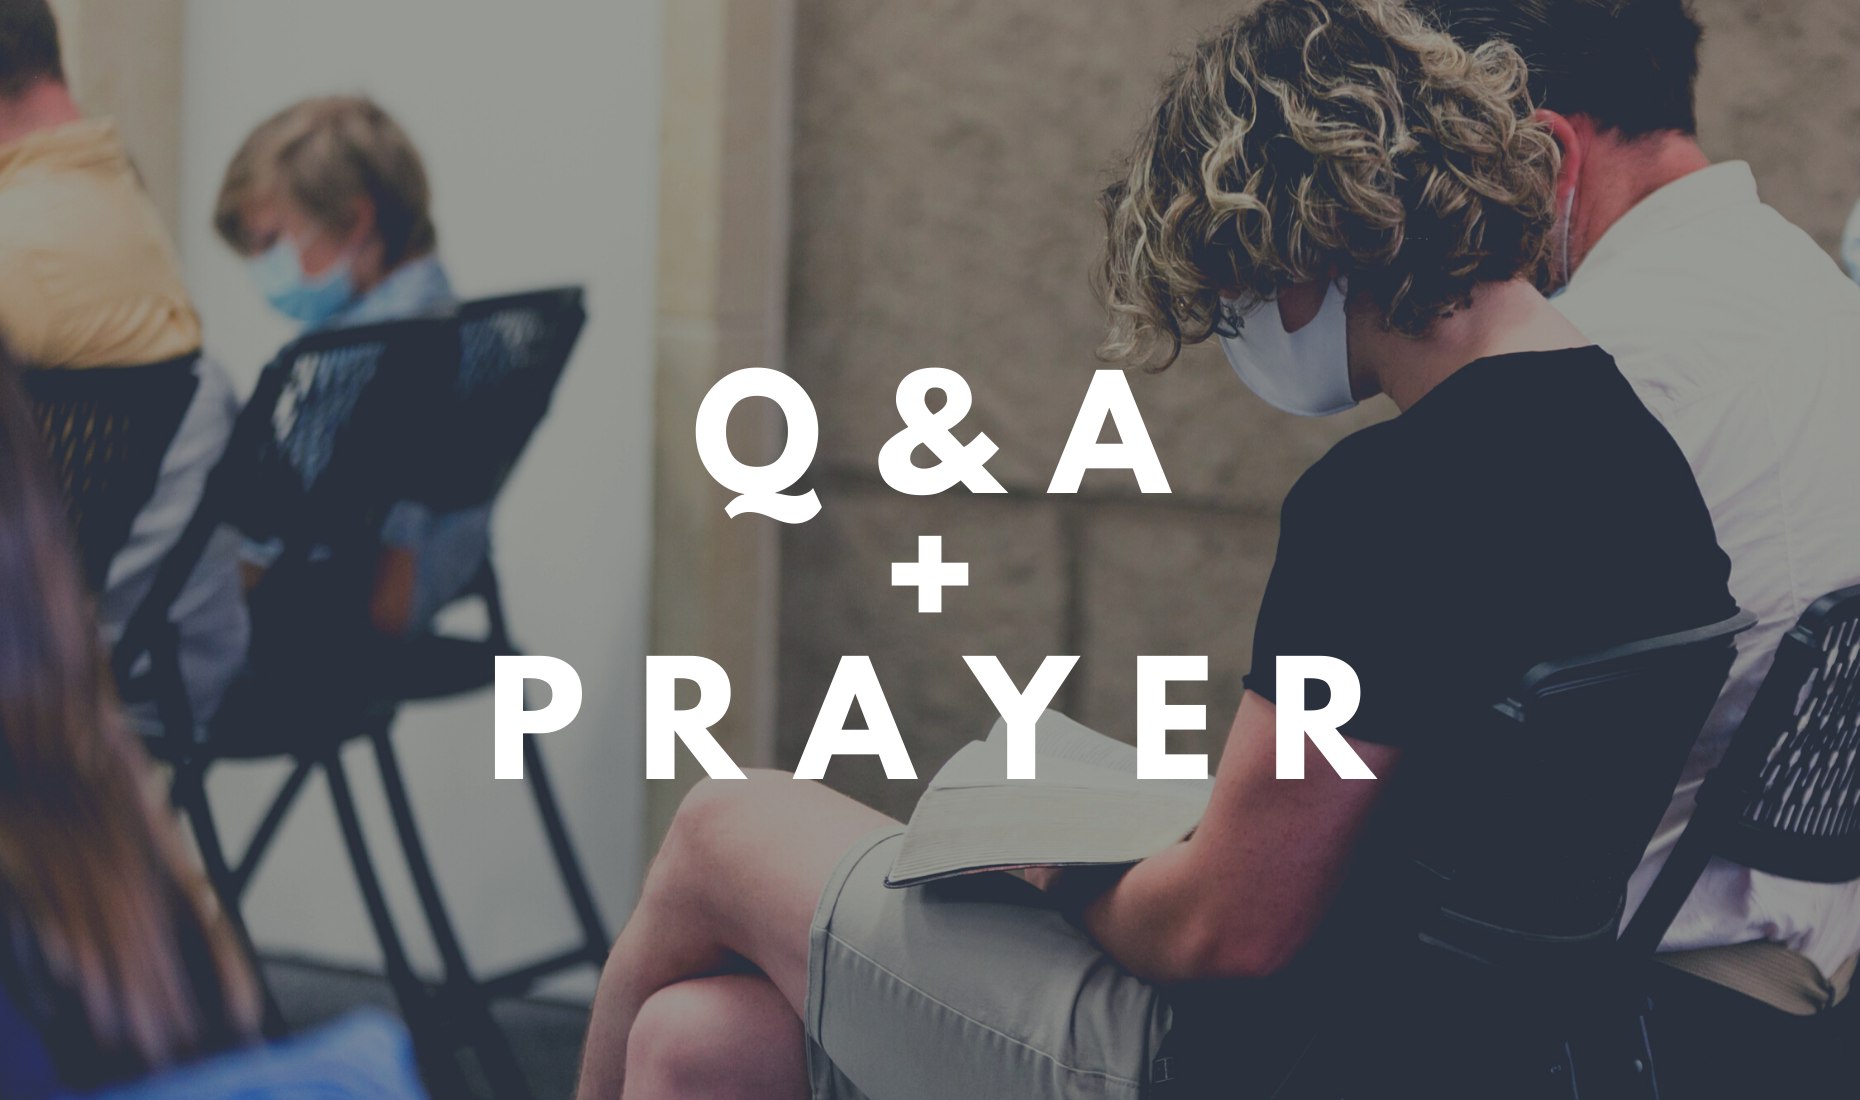 Q&A and Prayer image